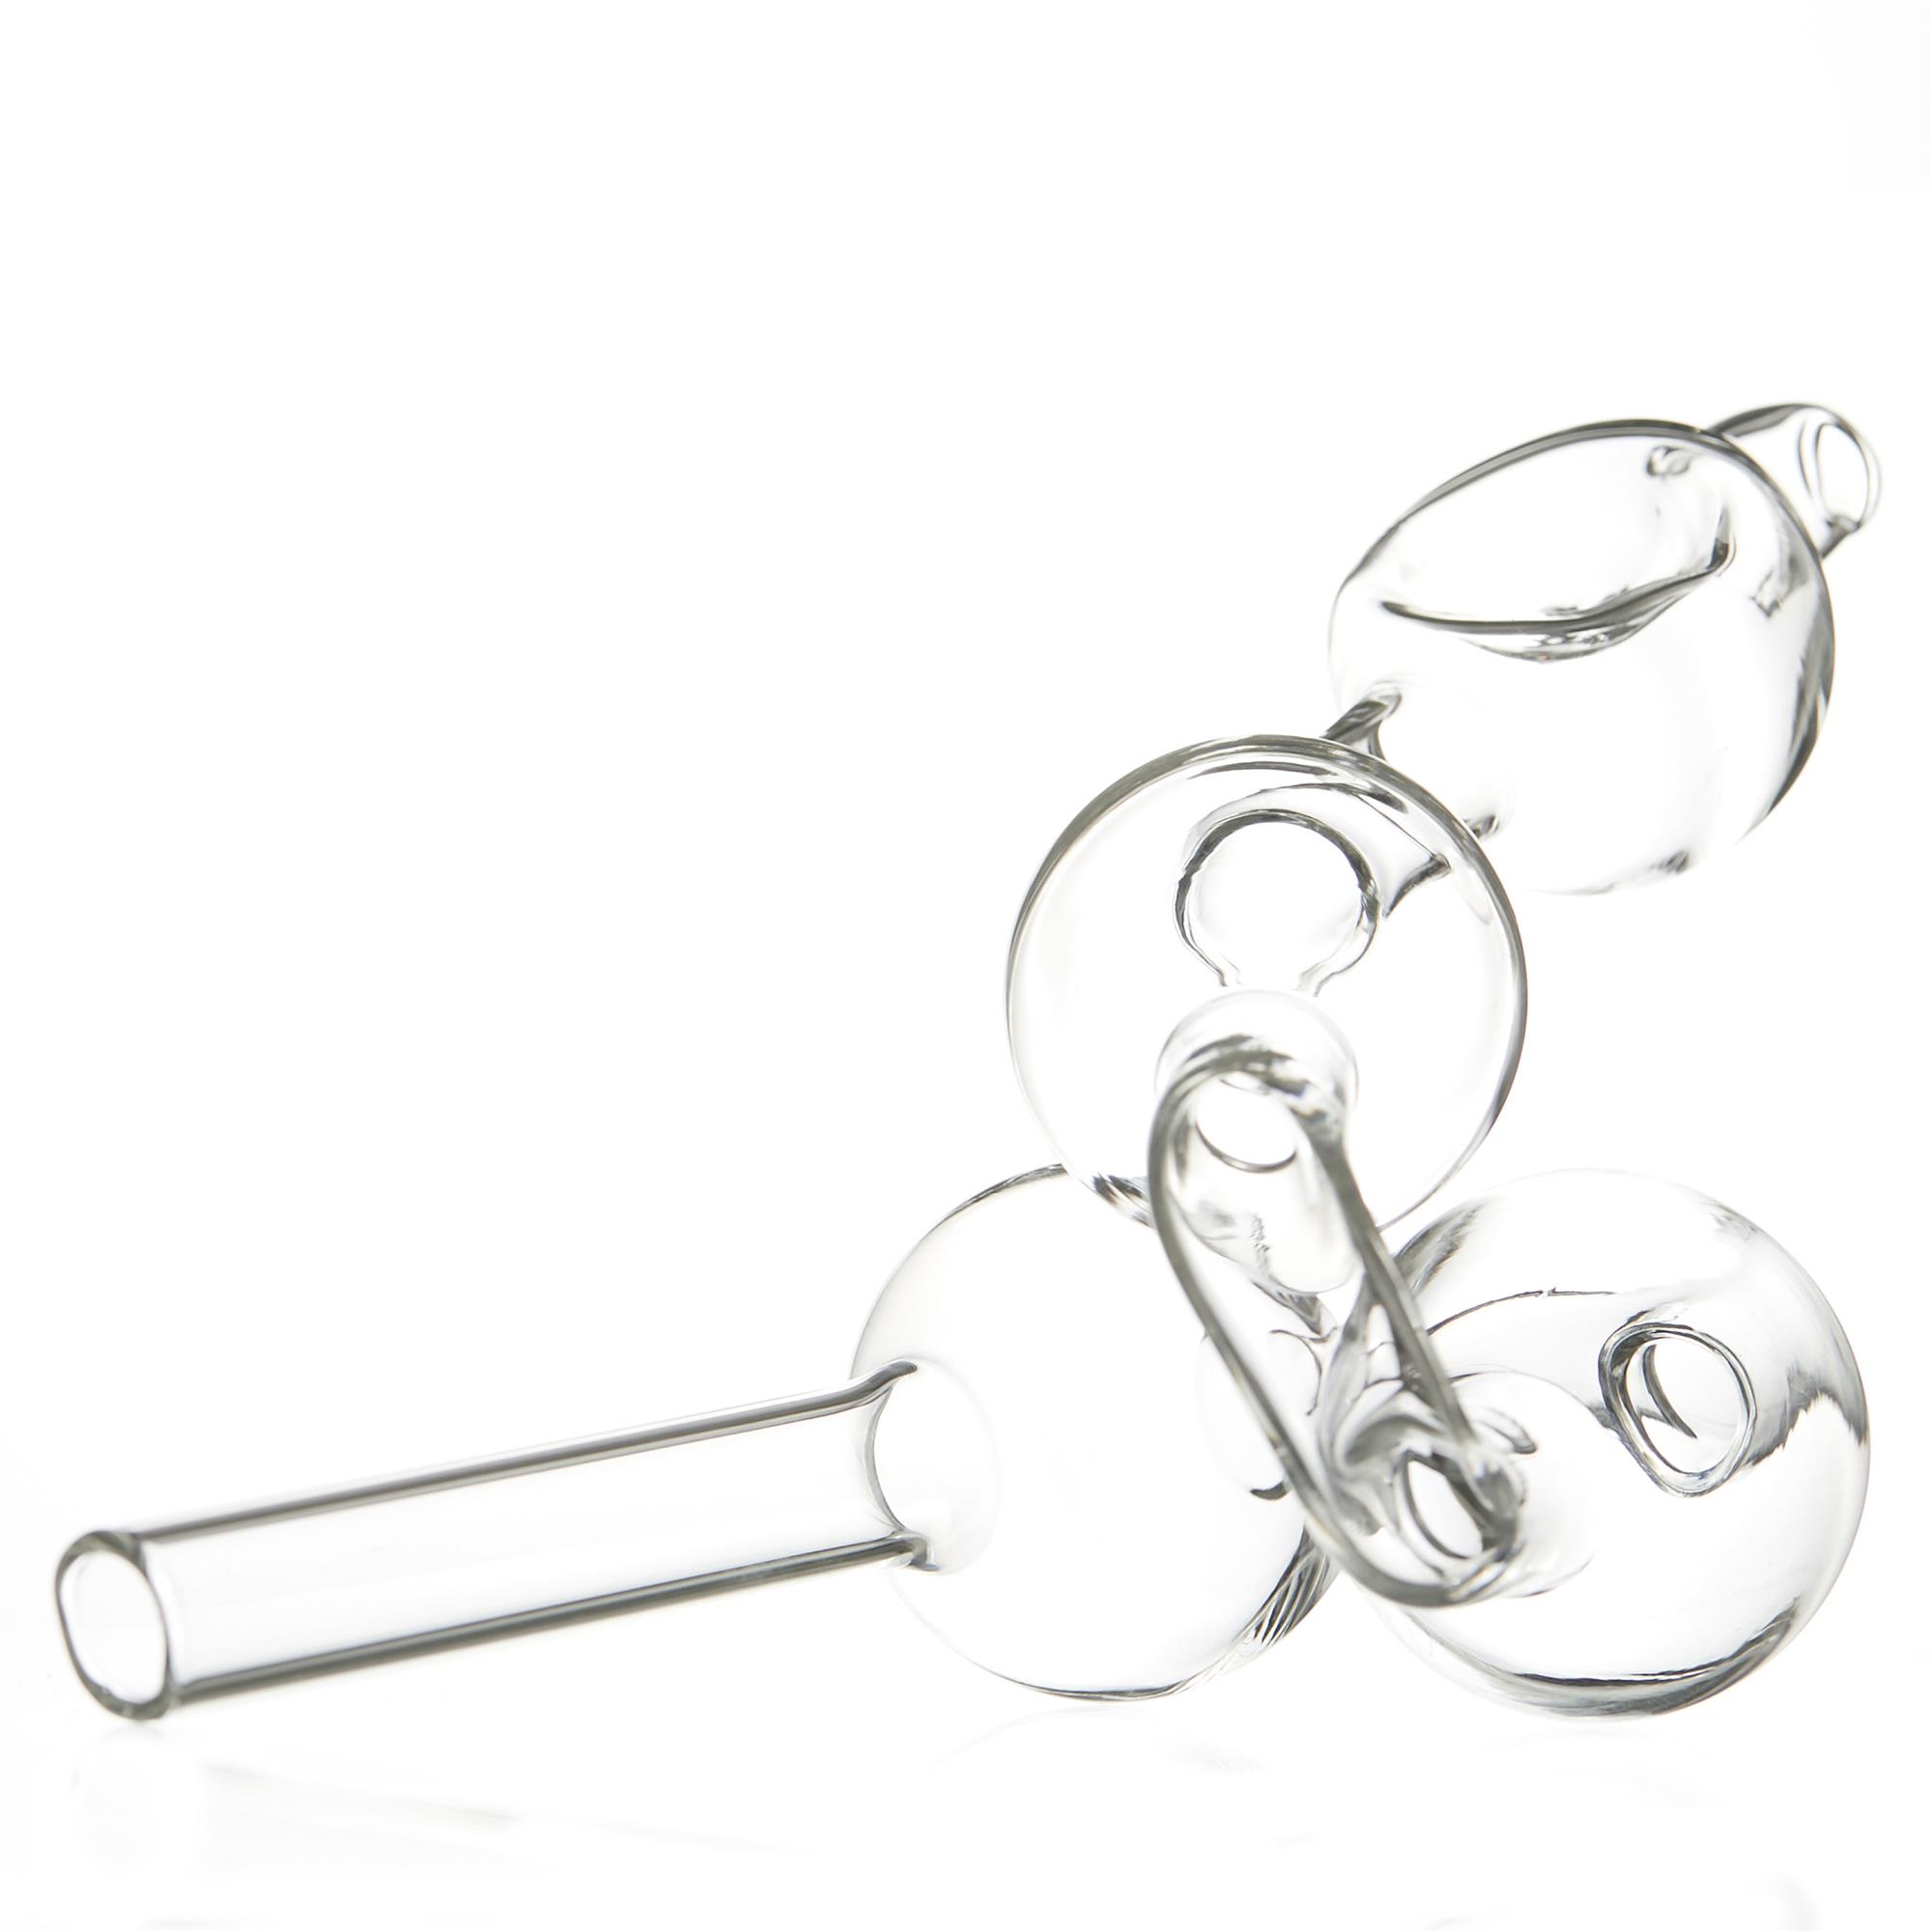 CRAZY 4 BUBBLE STEAMROLLER GLASS PIPE